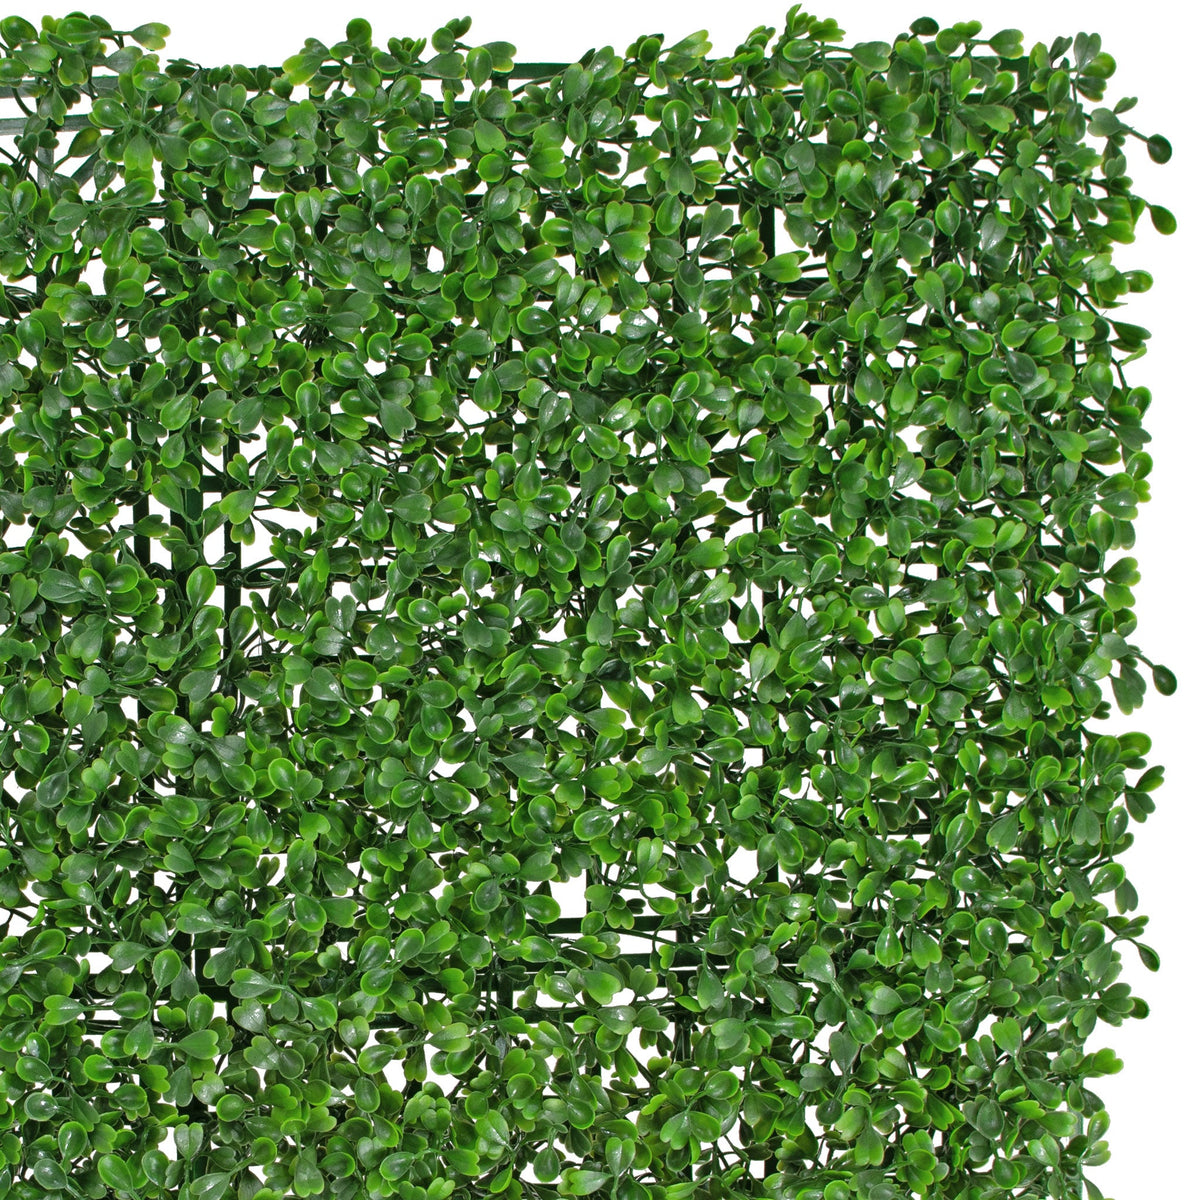 Order yours today to start decorating for your special place!  Sold in packs of 3 - 20in X 20in Squares, we give you 8 square feet of foliage to cover that empty area between you and your neighbors house or bring life to your office space.